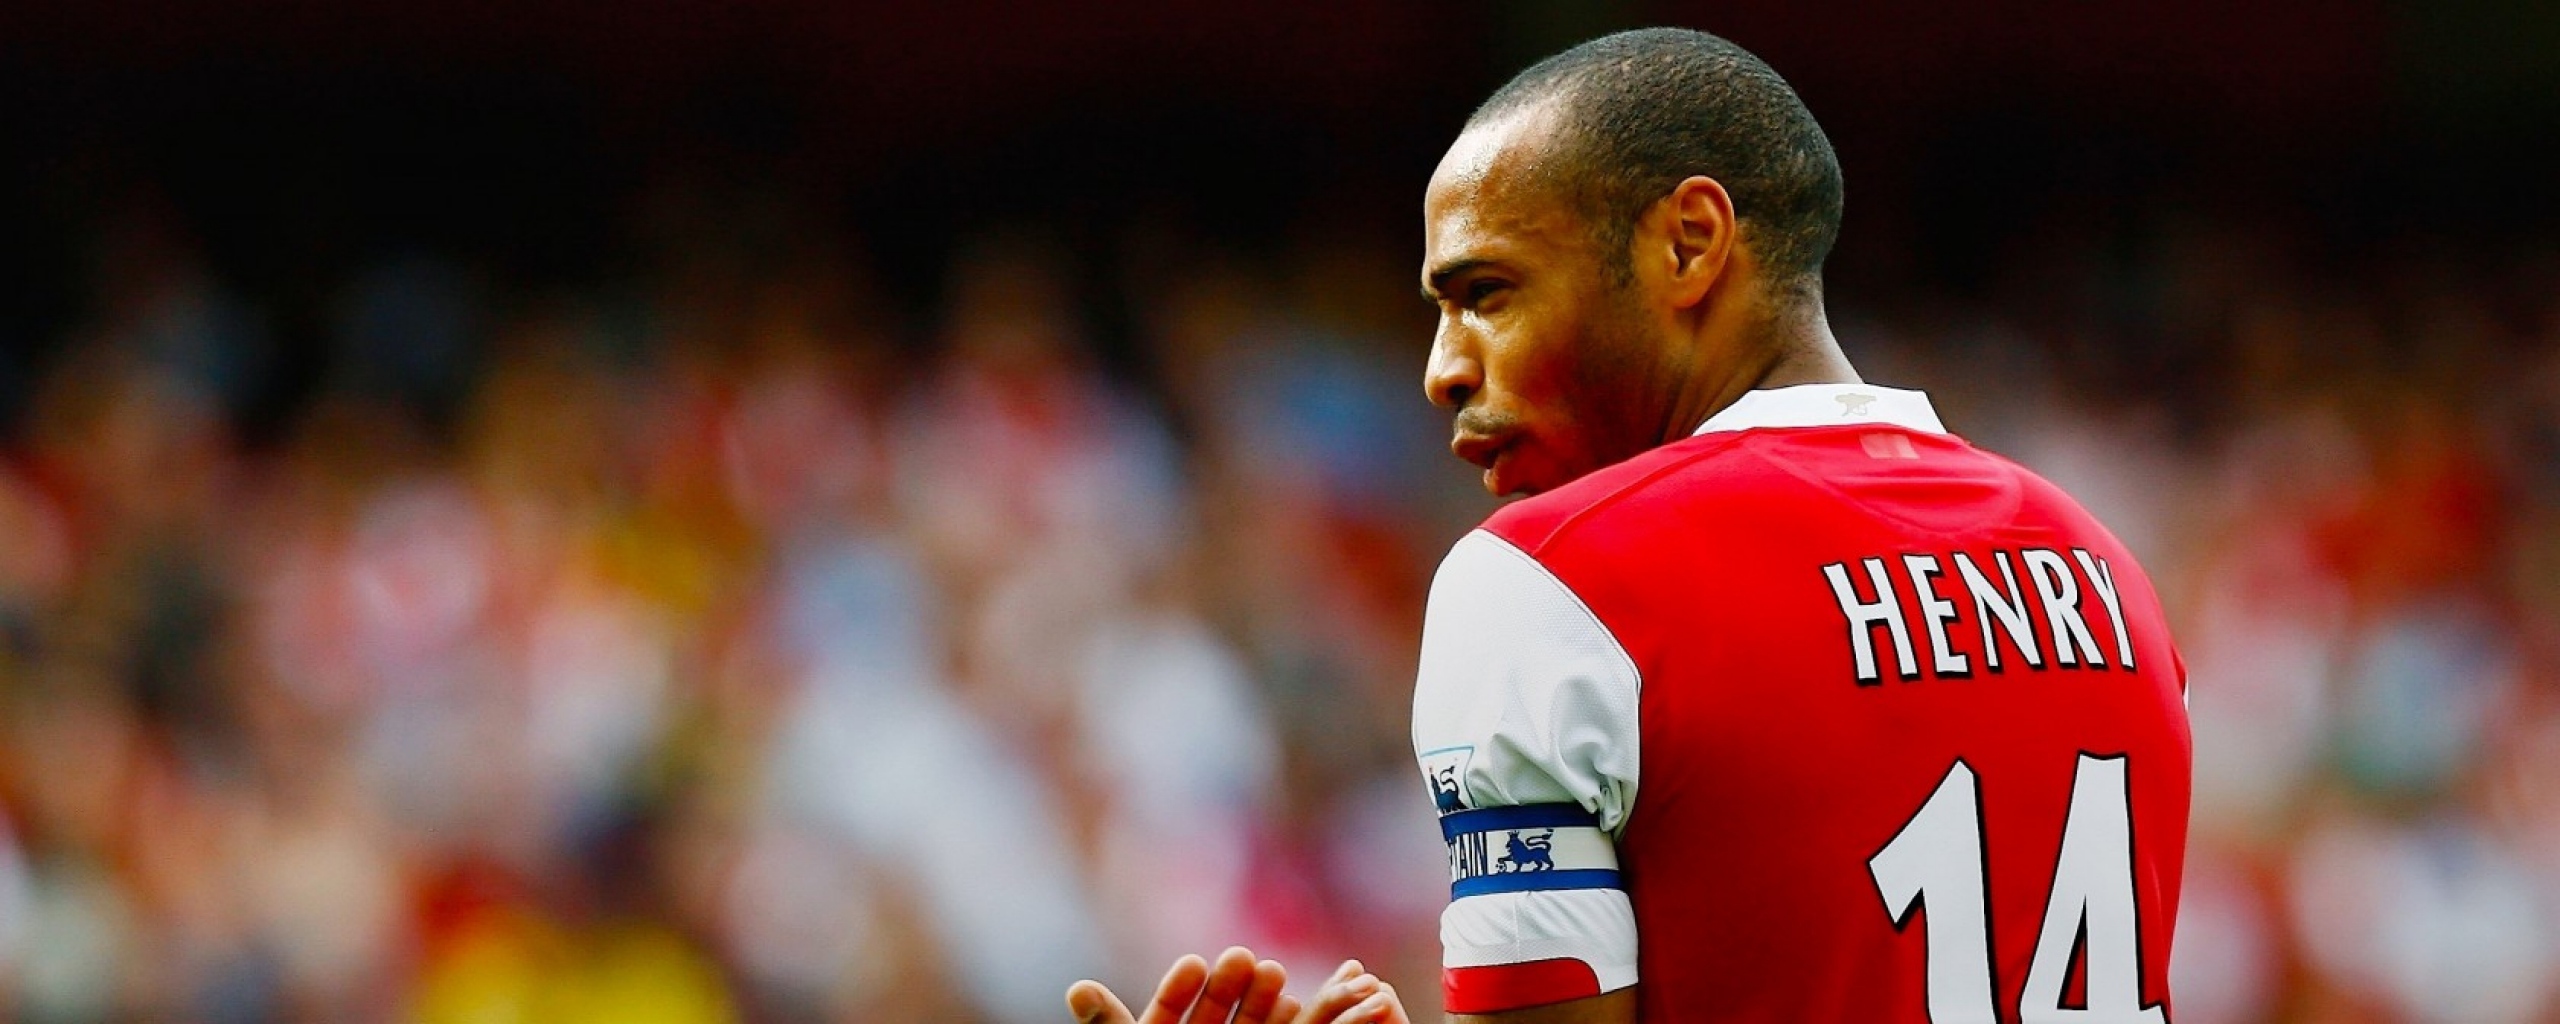 2560x1024 Wallpaper thierry henry, henry, arsenal, england club, shape, soccer player